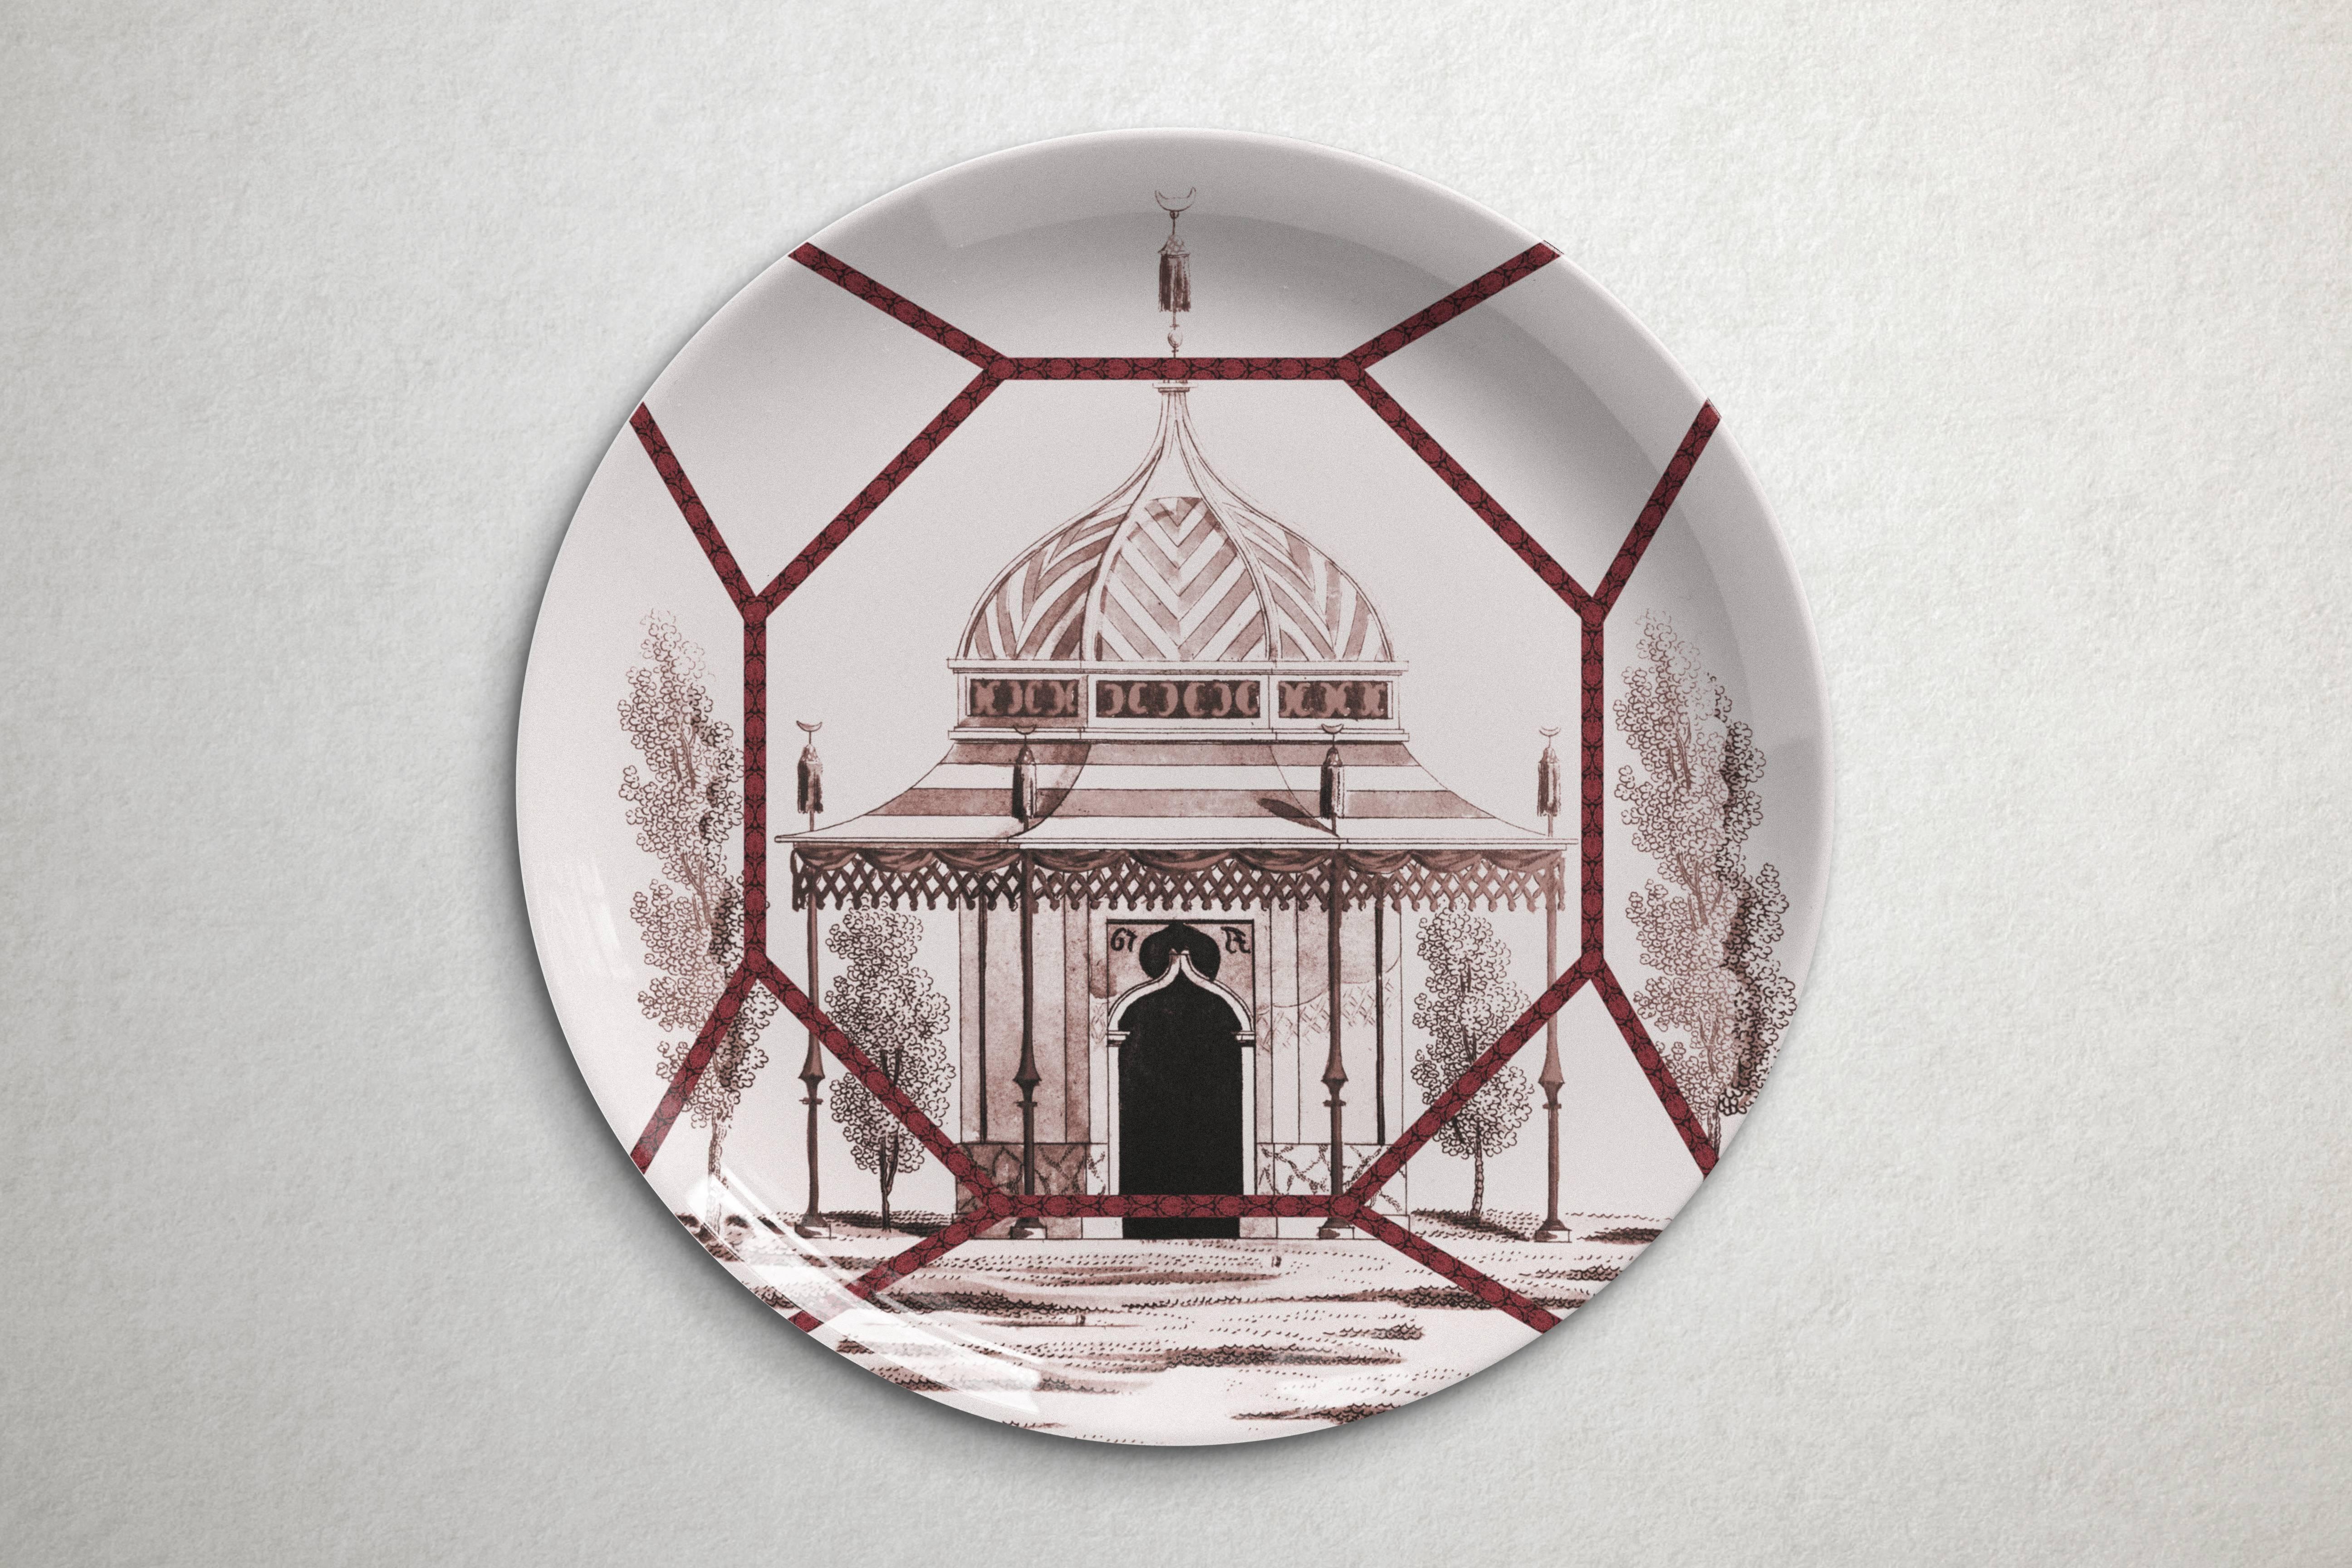 Beautiful Toptaki red porcelain dinner plate by Vito Nesta for Les Ottomans will make an elegant statement with sophisticated Art de la table for every occasion

Handmade in Italy

Upon request available in a set of three or six plates.